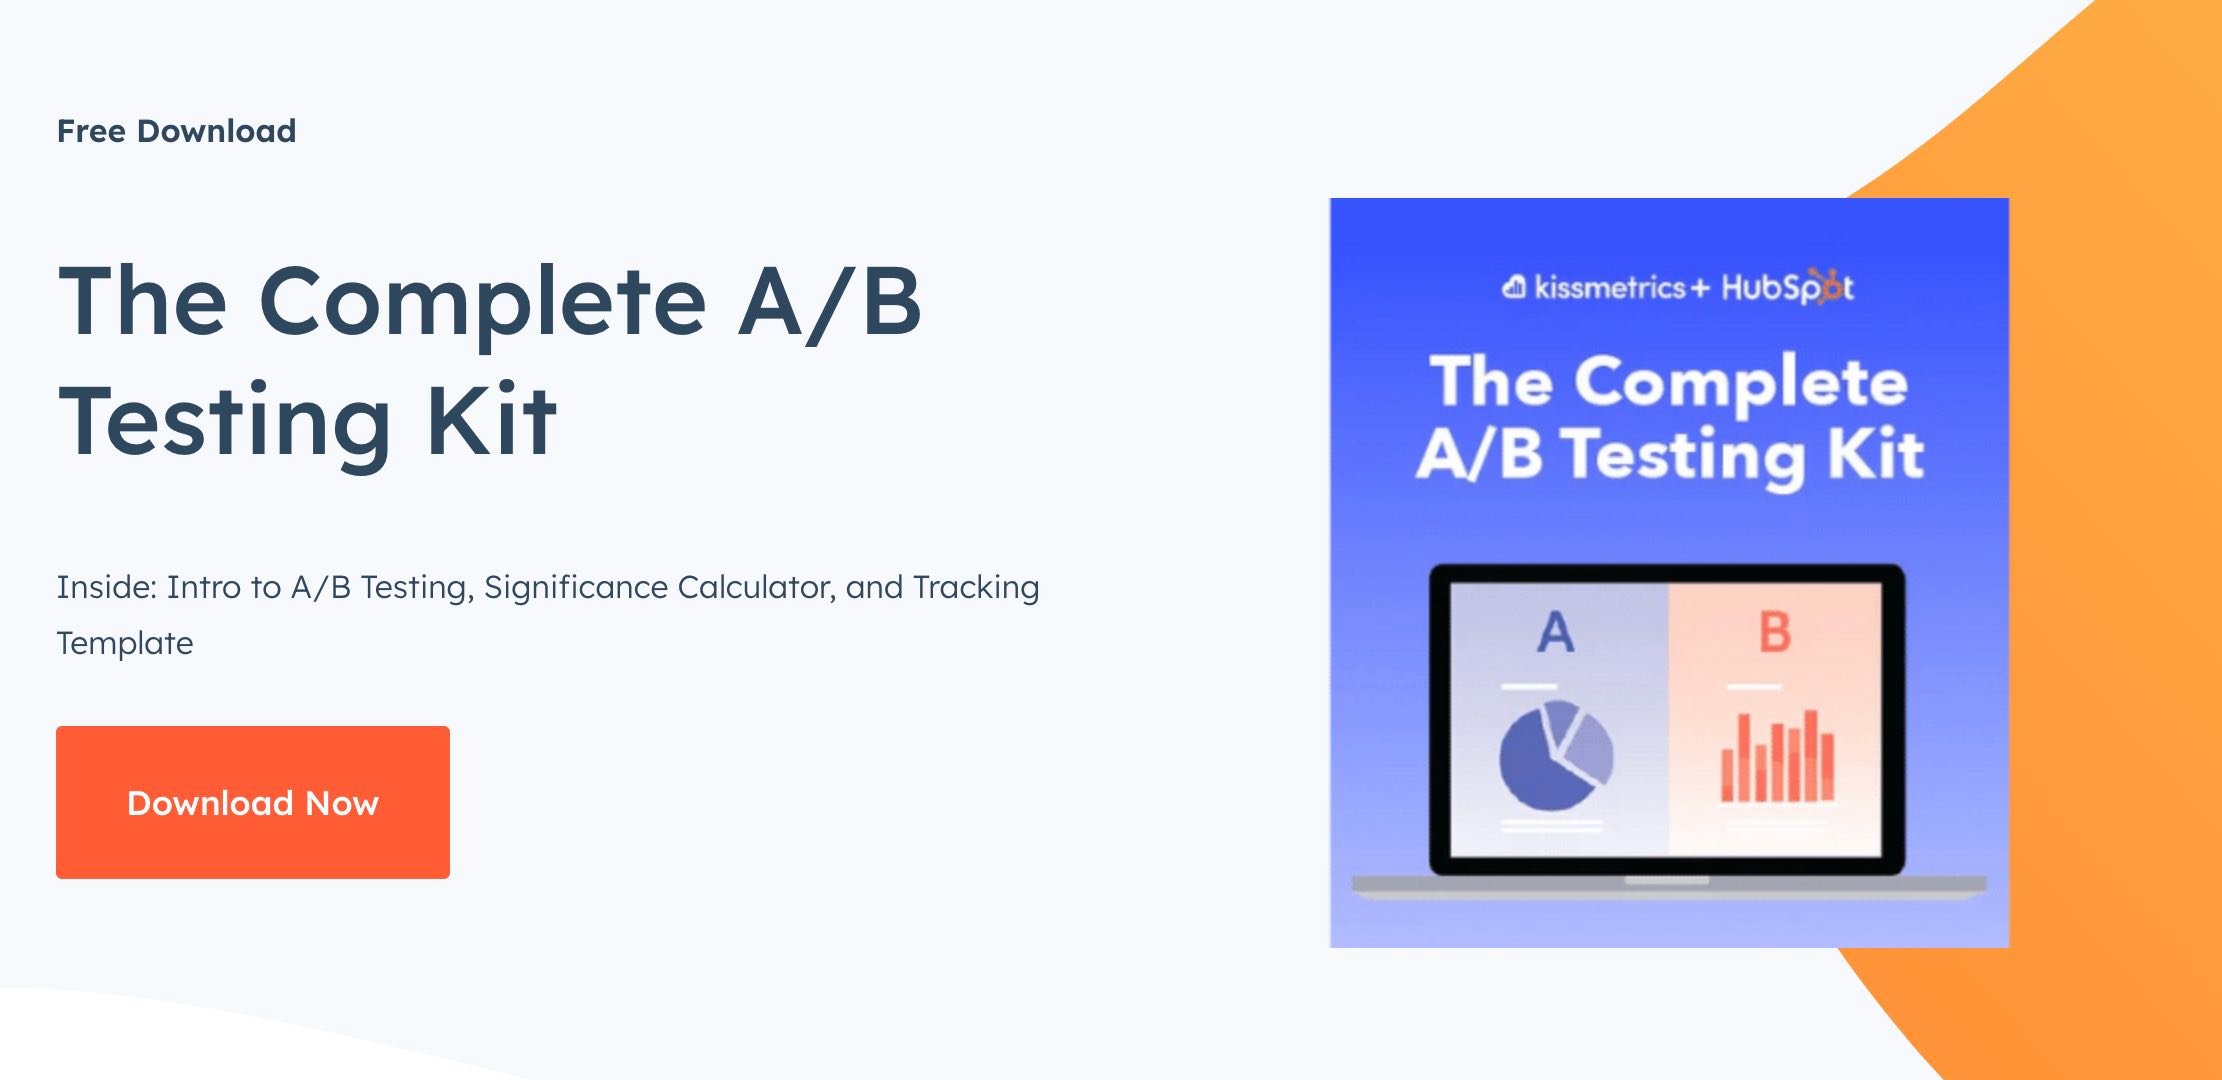 ab testing kit.jpg?width=2222&height=1080&name=ab testing kit - How to Do A/B Testing: 15 Steps for the Perfect Split Test